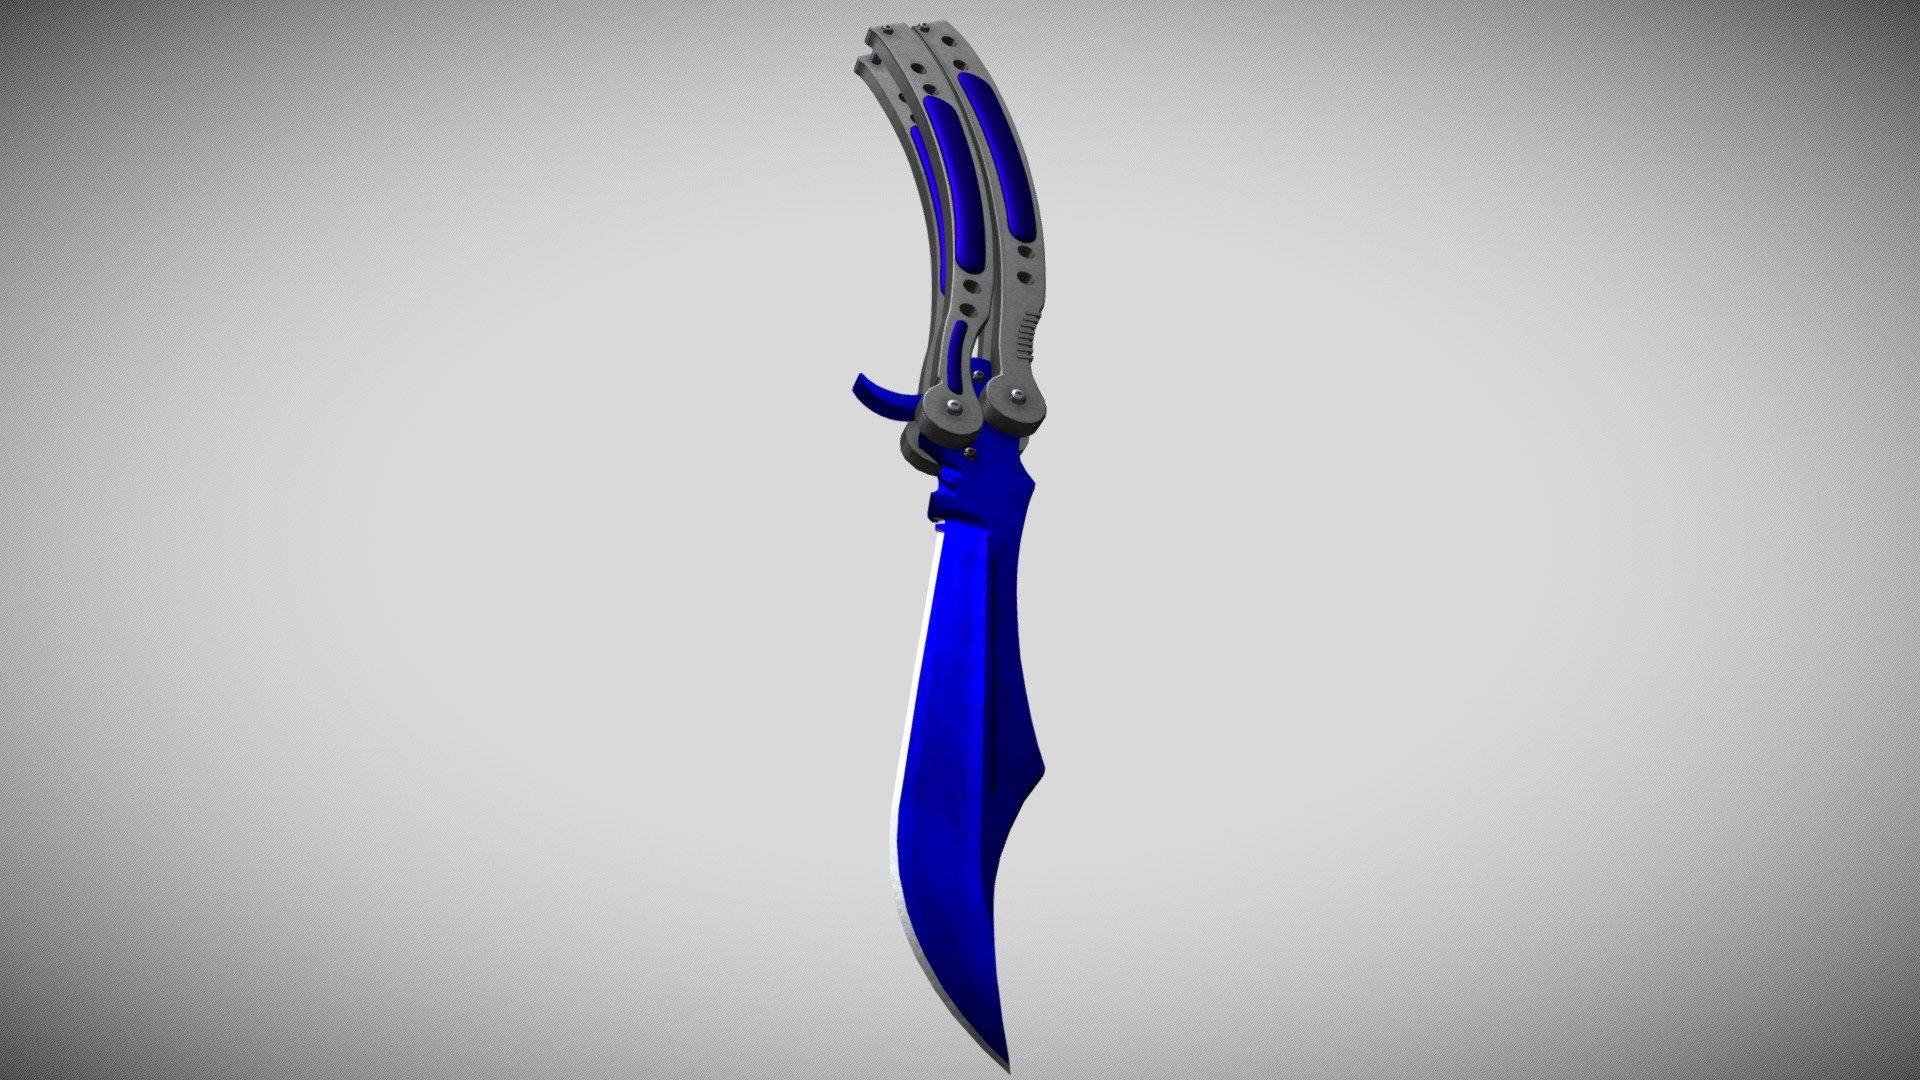 Butterfly Knife from CS:GO with sapphire pattern Model made in Autodesk MAYA, textured and rendered in Substance Painter - Butterfly Knife Sapphire - Buy Royalty Free 3D model by P7PO (@PiPo07) 3d model